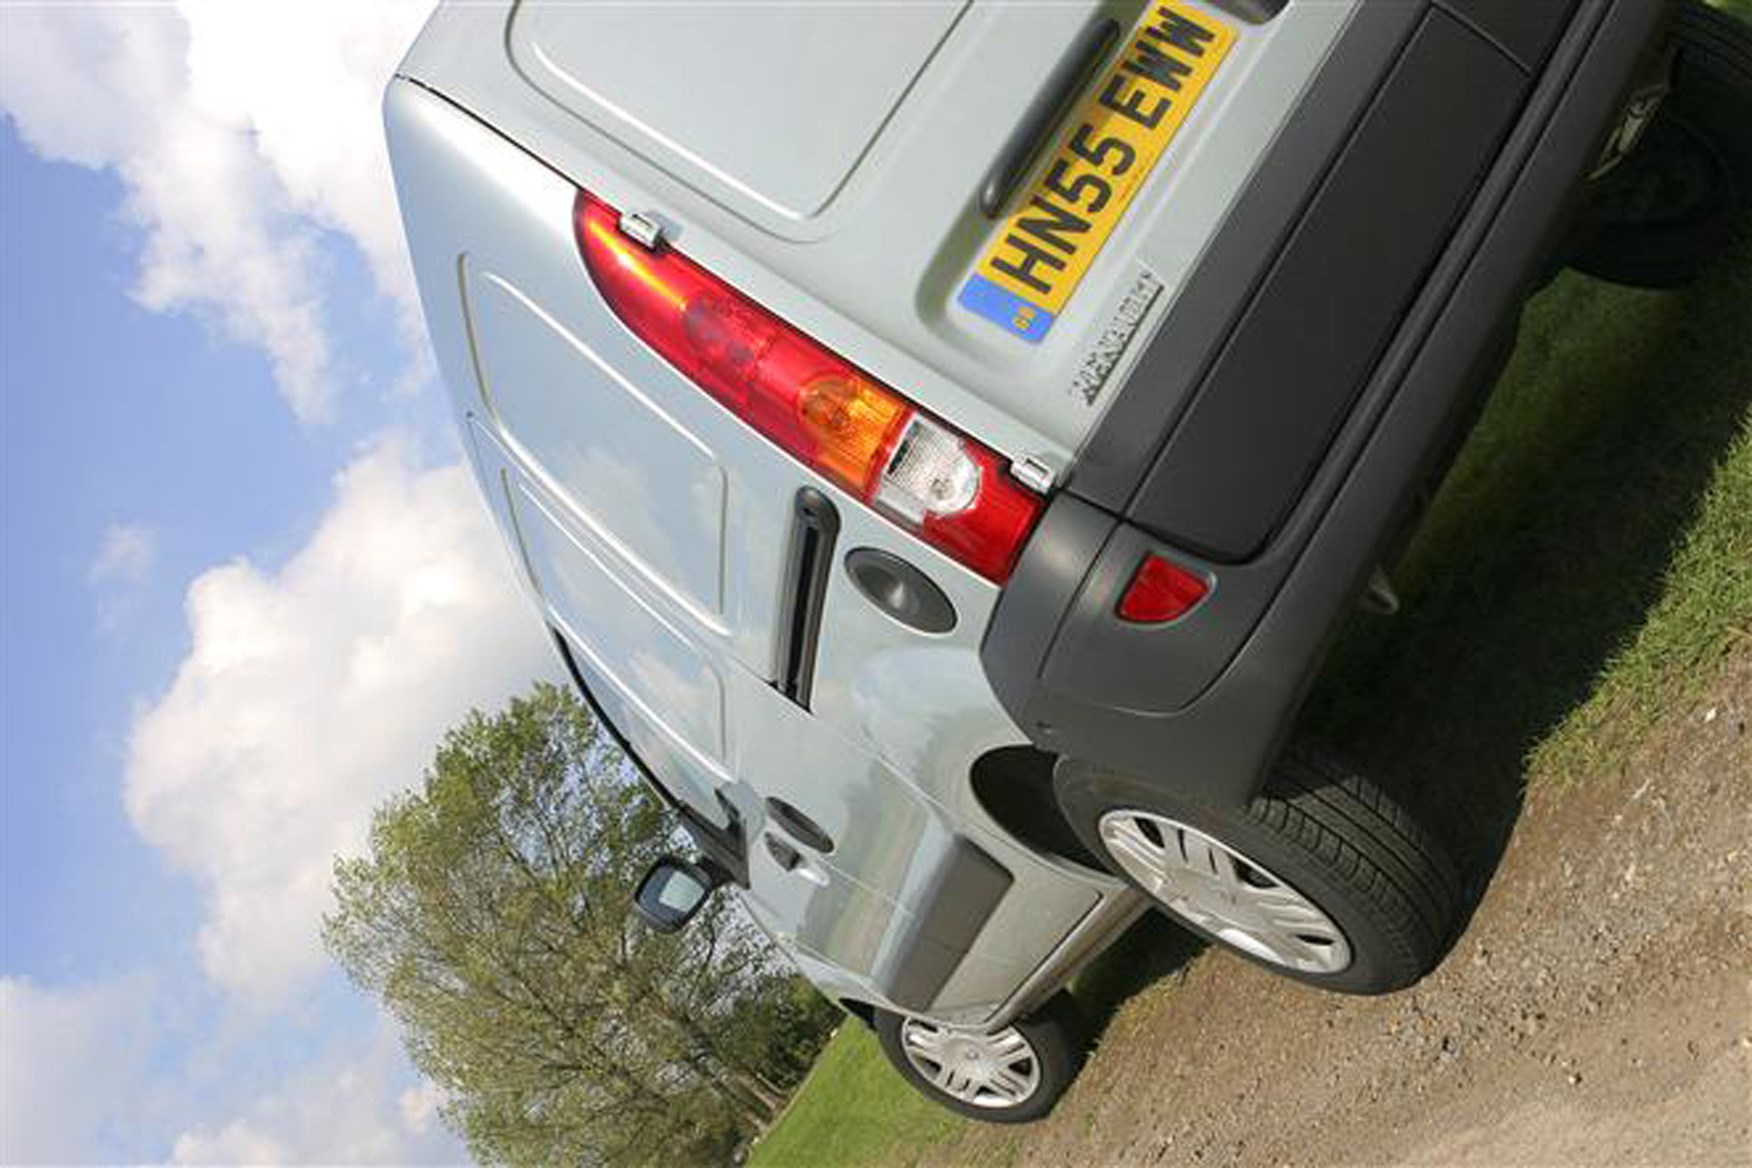 Renault Kangoo review on Parkers Vans - rear exterior